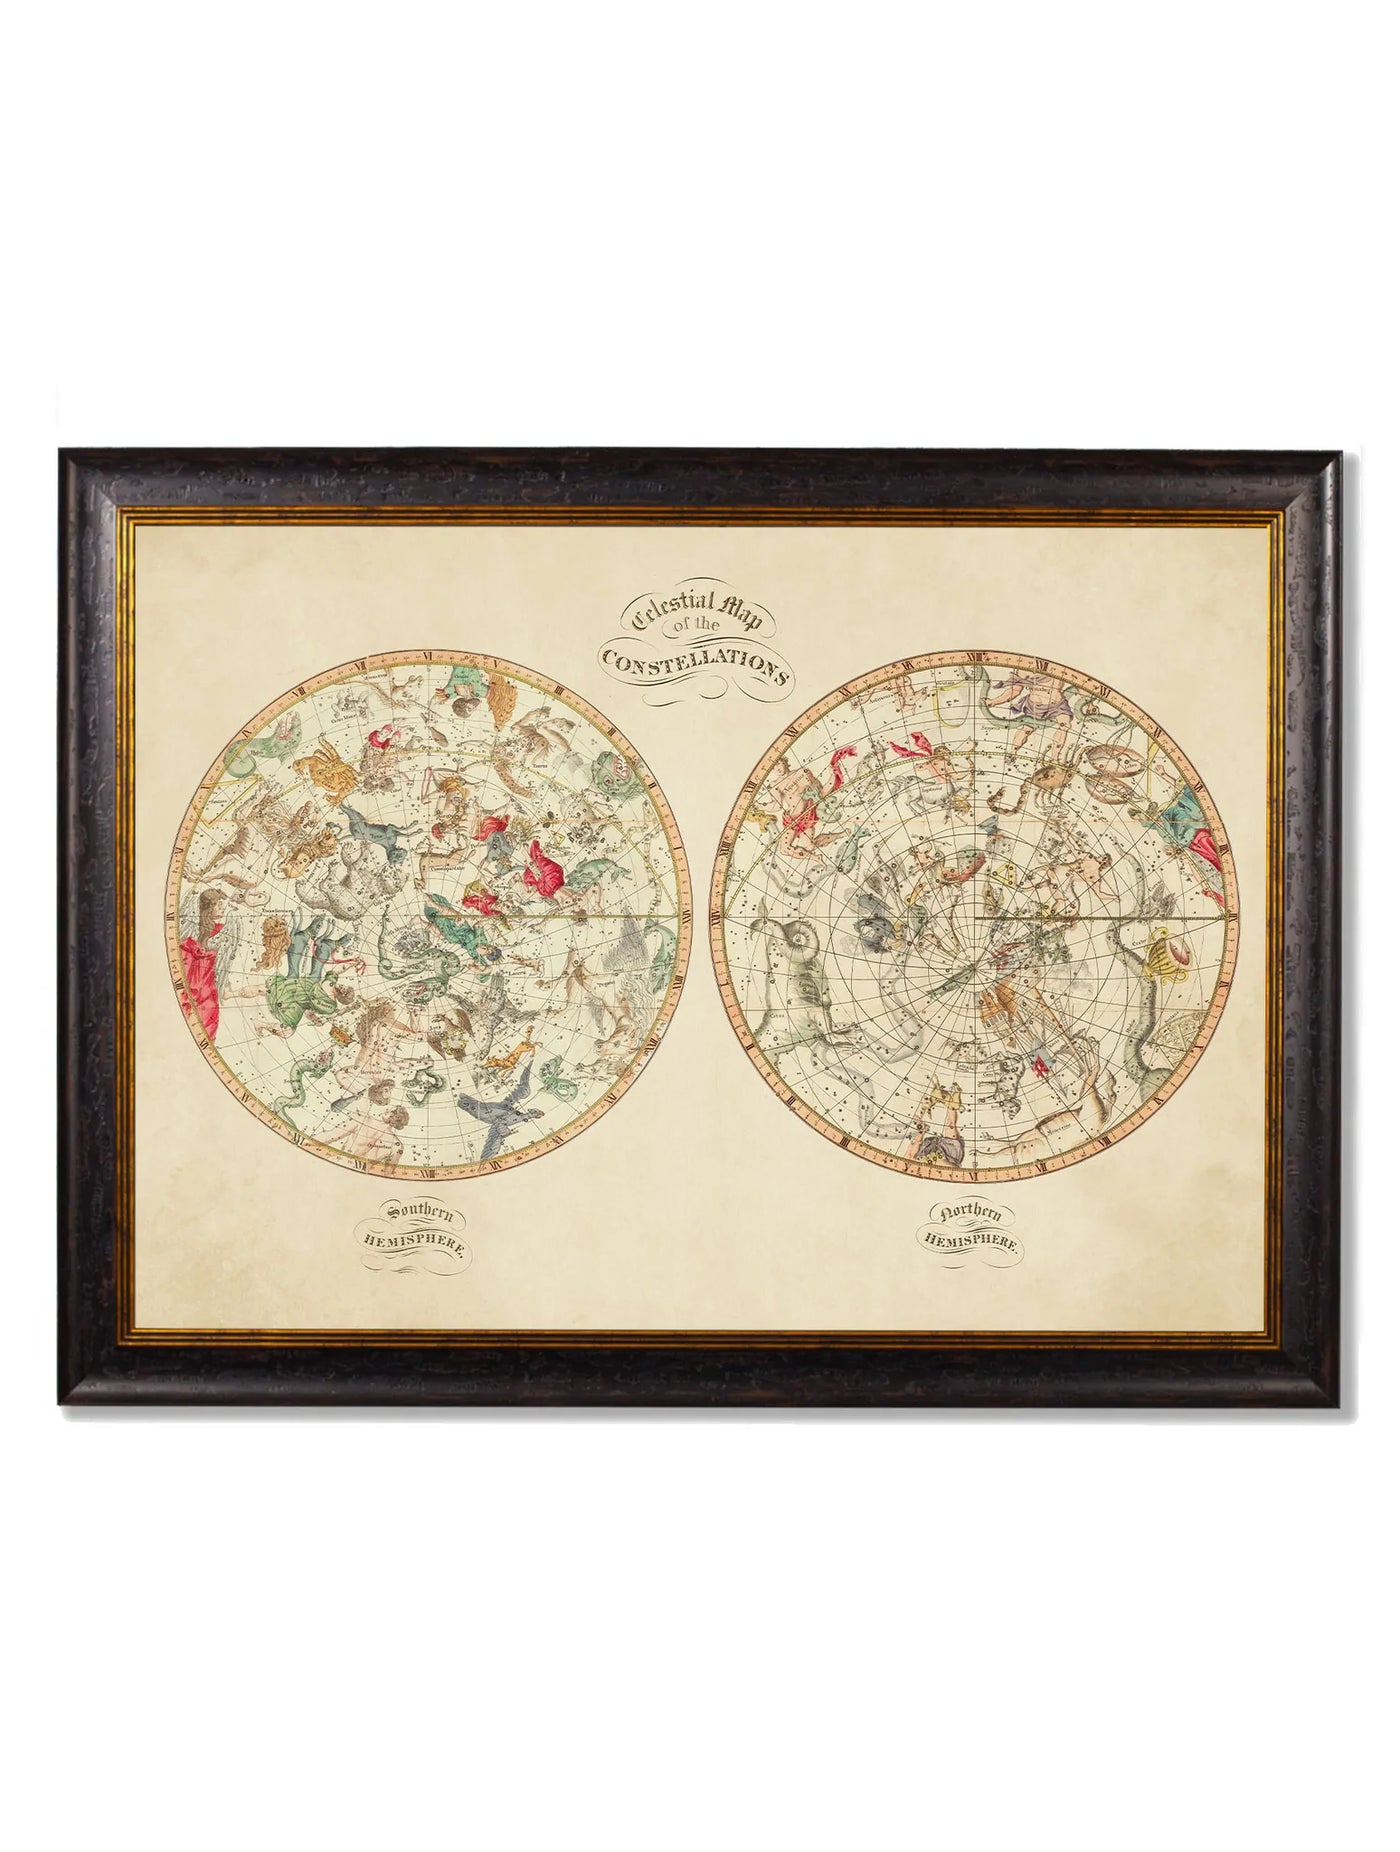 C.1820 MAP OF THE CONSTELLATIONS - TheArtistsQuarter